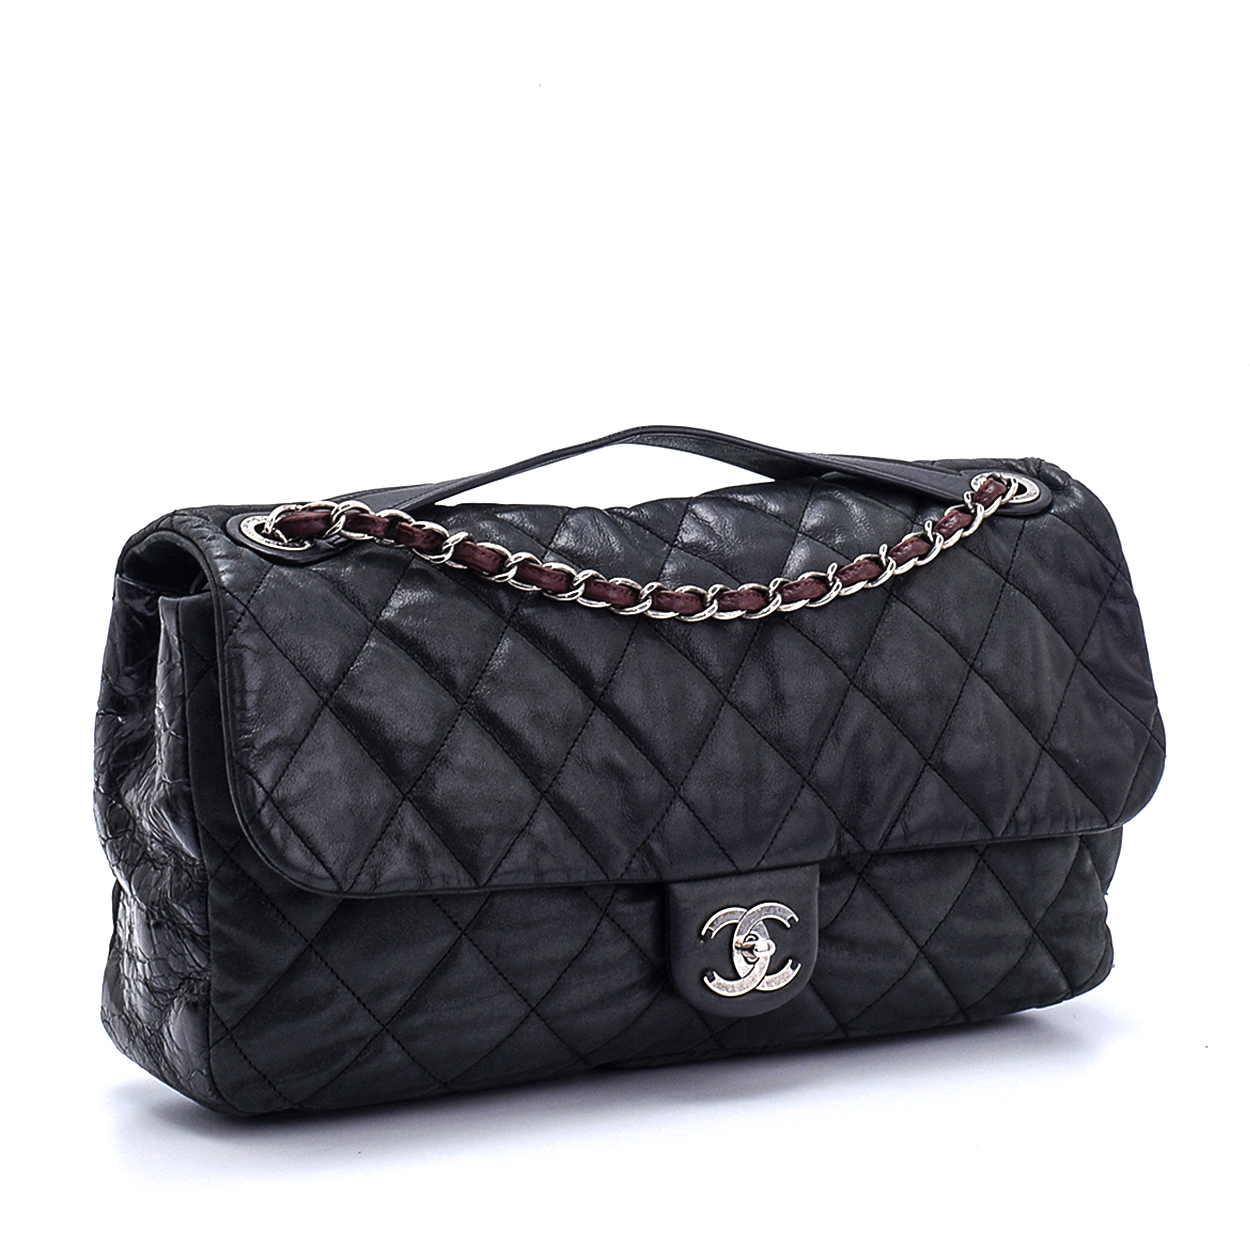 Chanel - Iridescent Calfskin Leather Large In The Mix Flap Bag